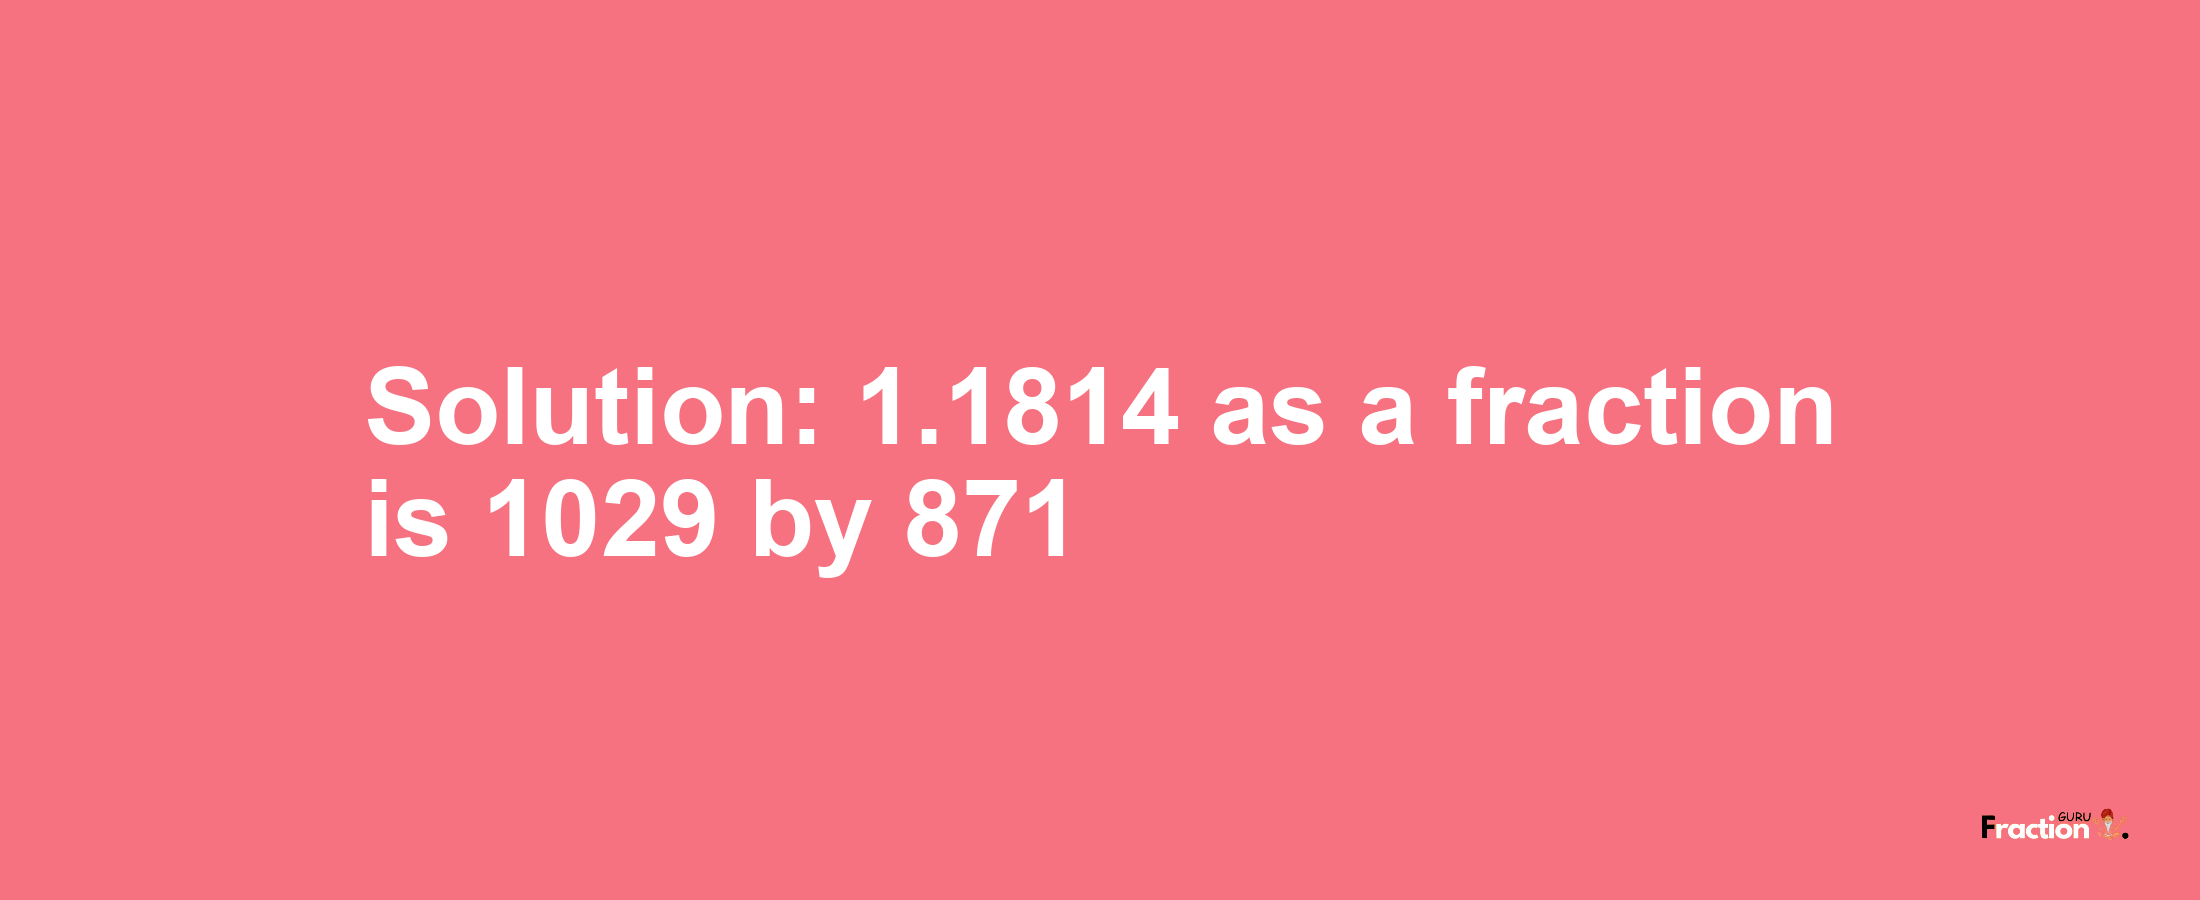 Solution:1.1814 as a fraction is 1029/871